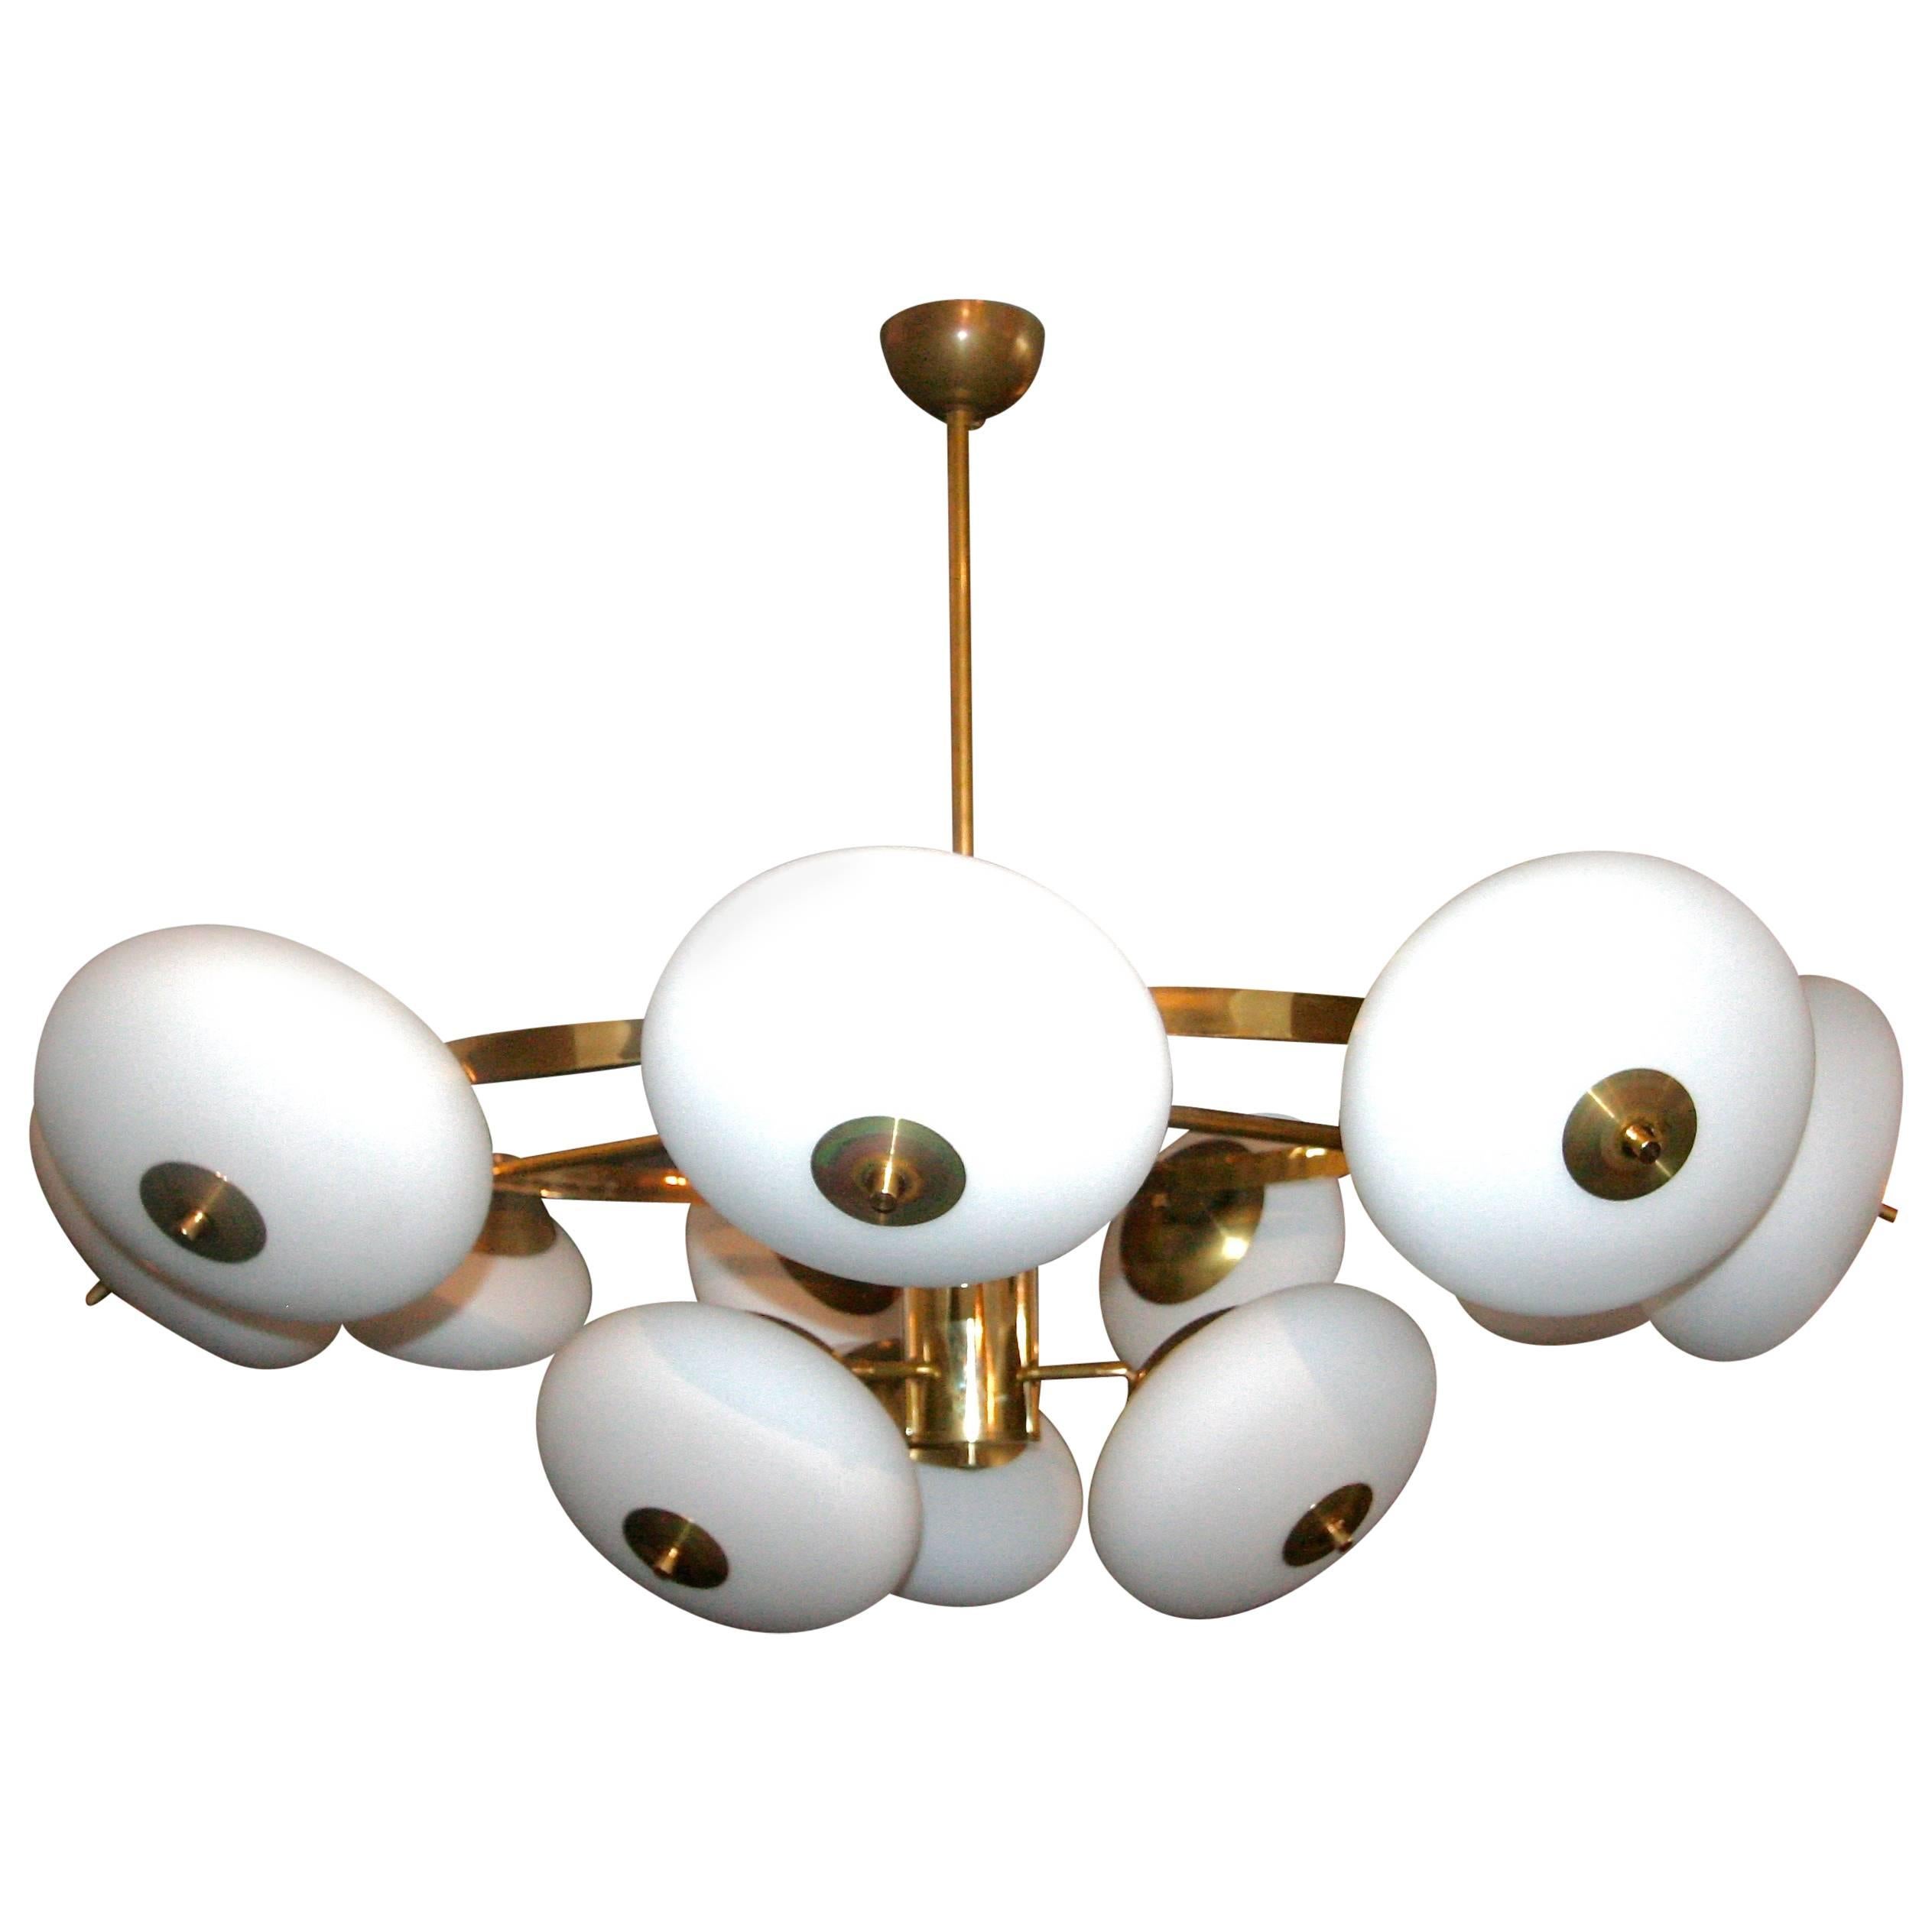 Large two-tiered round Italian chandelier from the 1970s with brass features and 12 adjustable white glass balls.